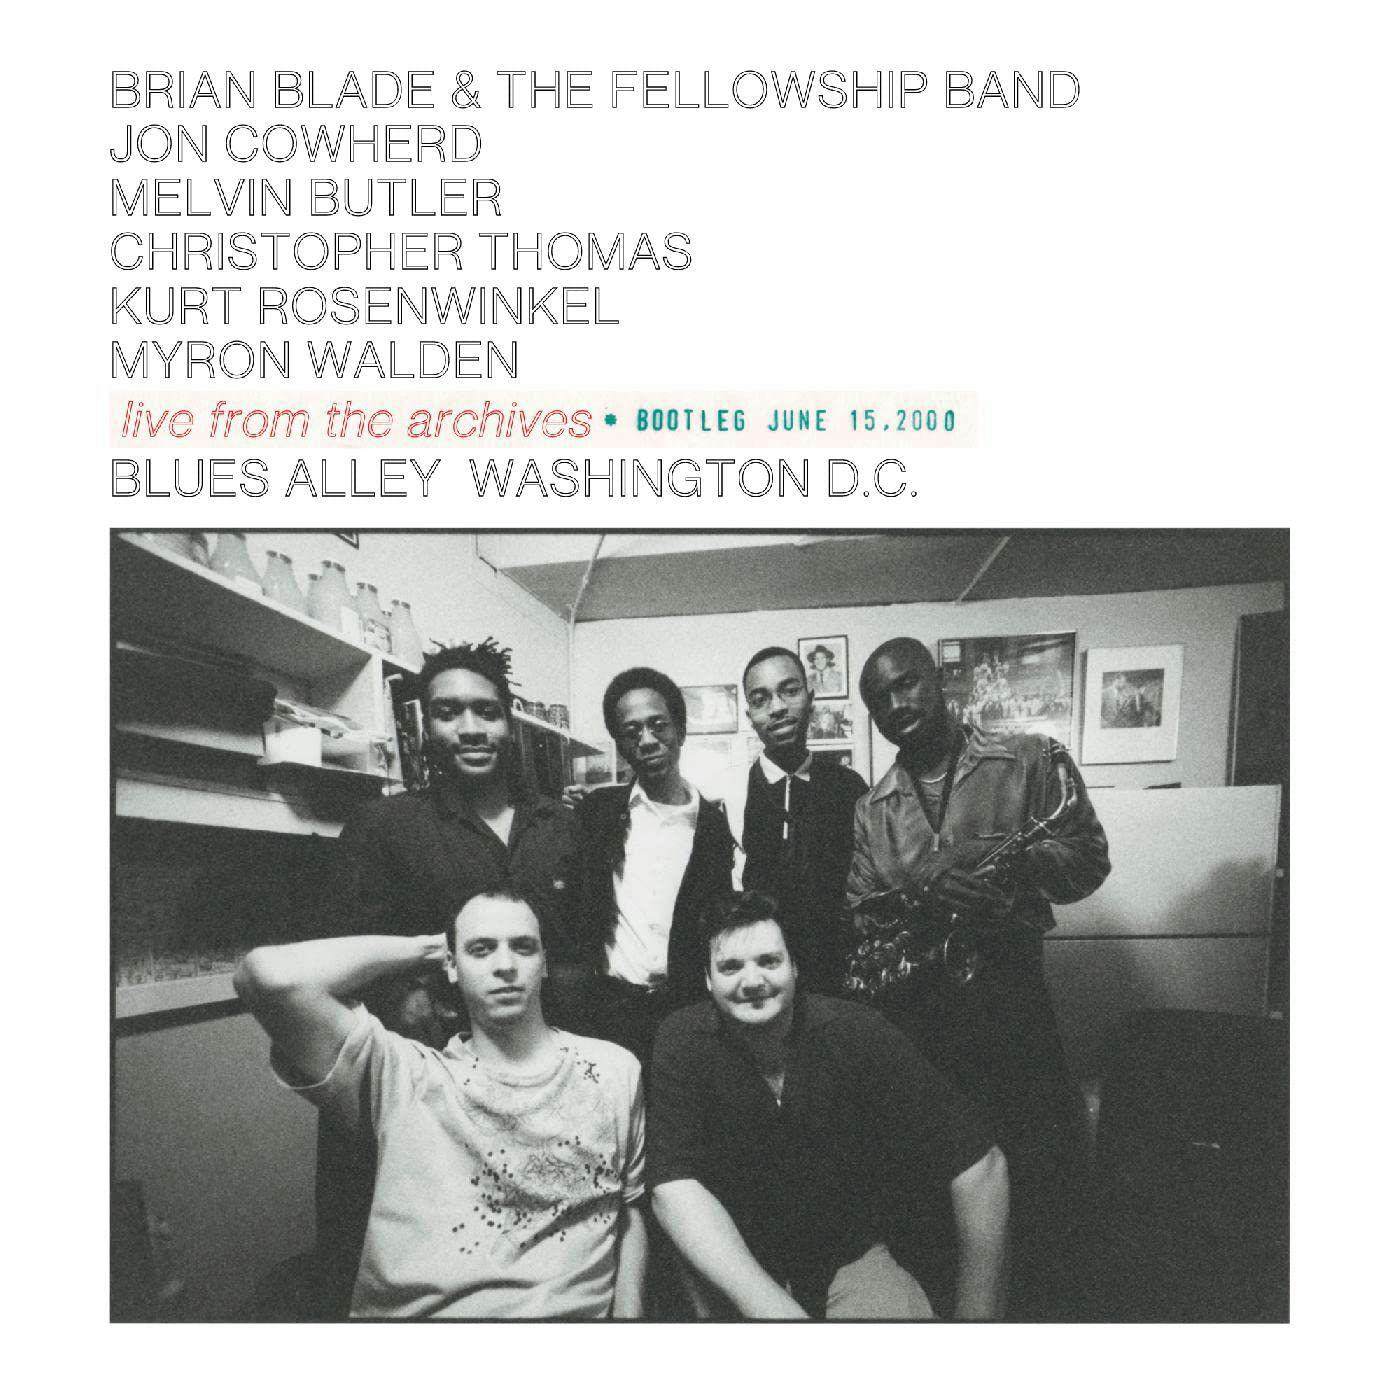 Brian Blade & The Fellowship Band LIVE FROM THE ARCHIVES - BOOTLEG JUNE 15, 2000 Vinyl Record